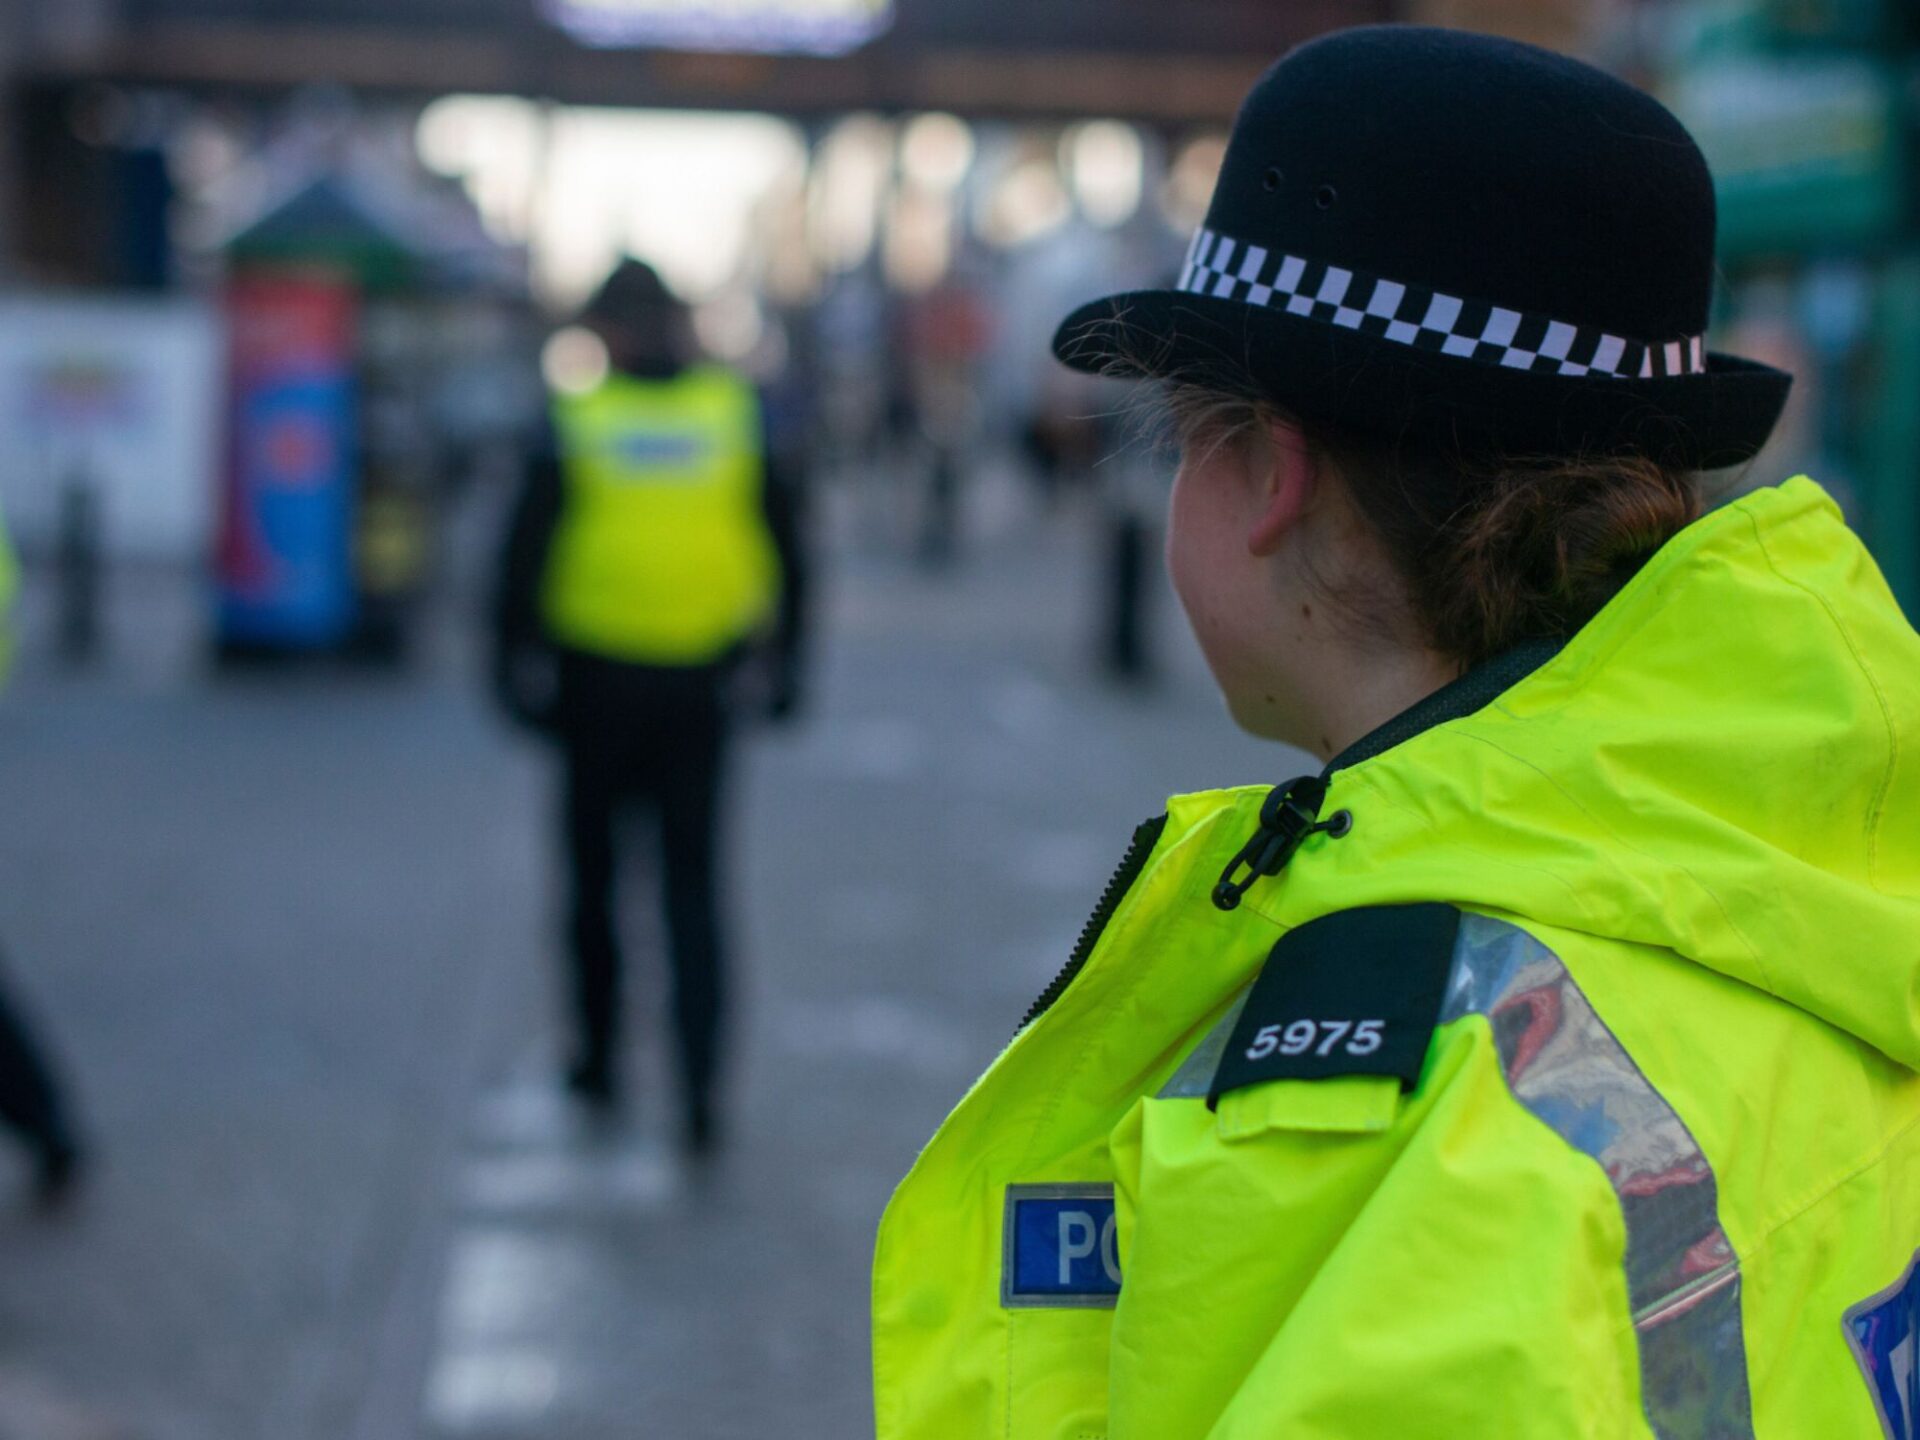 Become a Special Constable with Northumbria Police